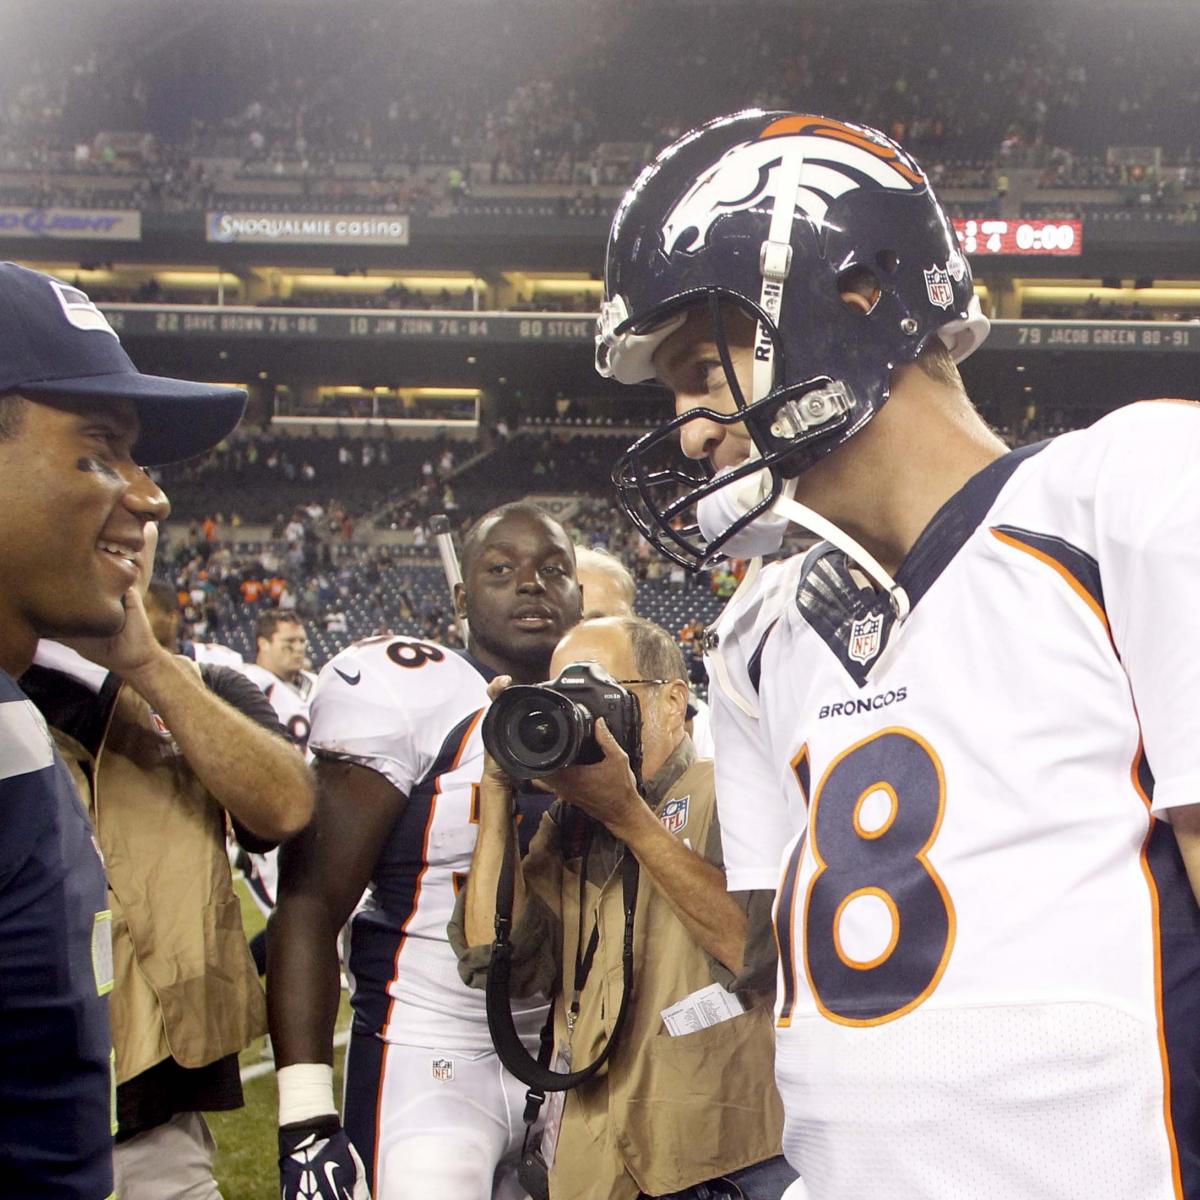 Super Bowl 2014: Start Time and TV Schedule for Seahawks vs. Broncos | Bleacher Report